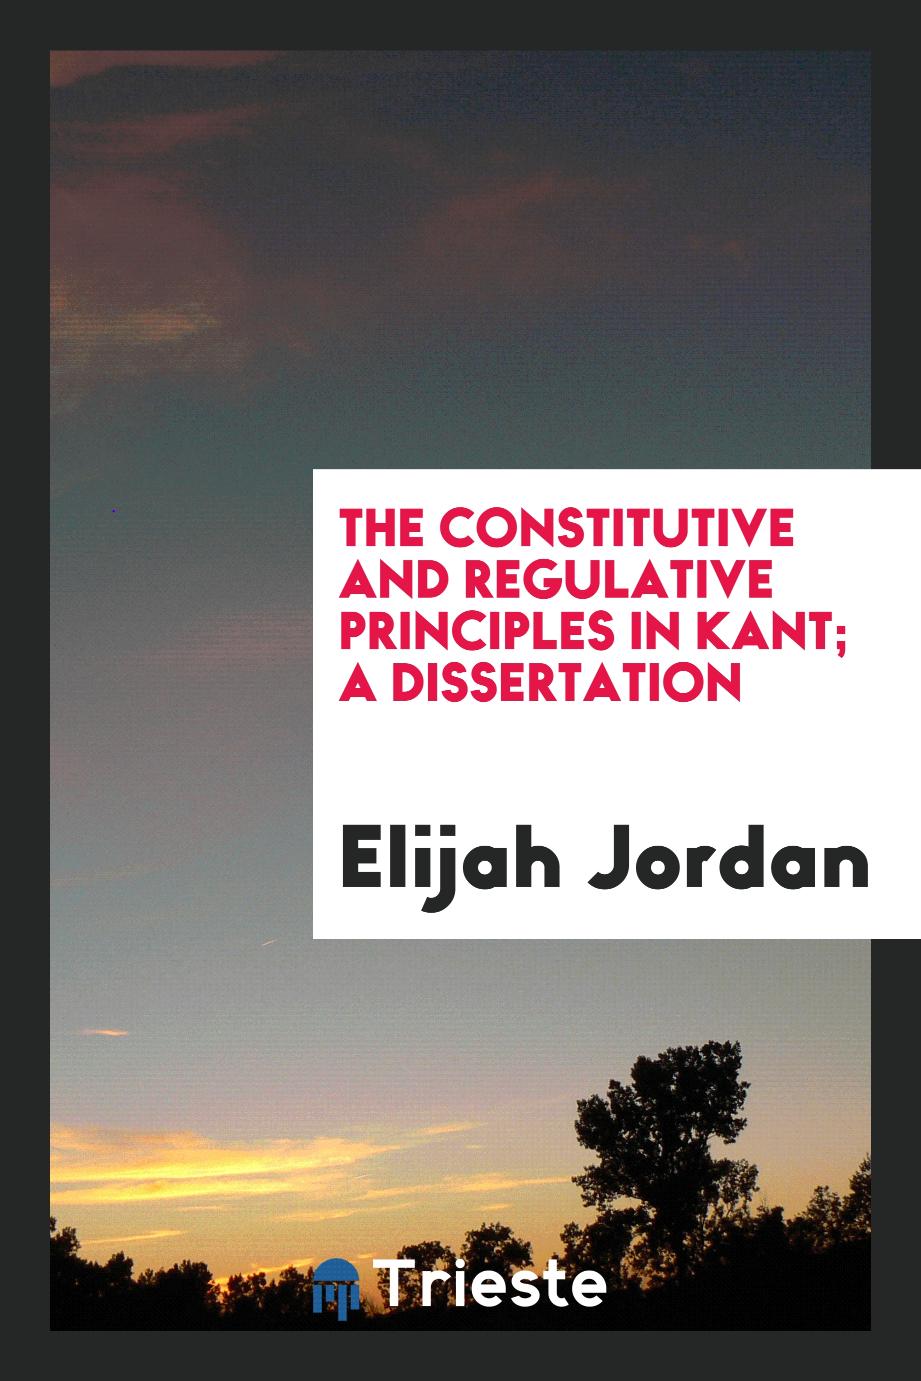 The constitutive and regulative principles in Kant; a dissertation